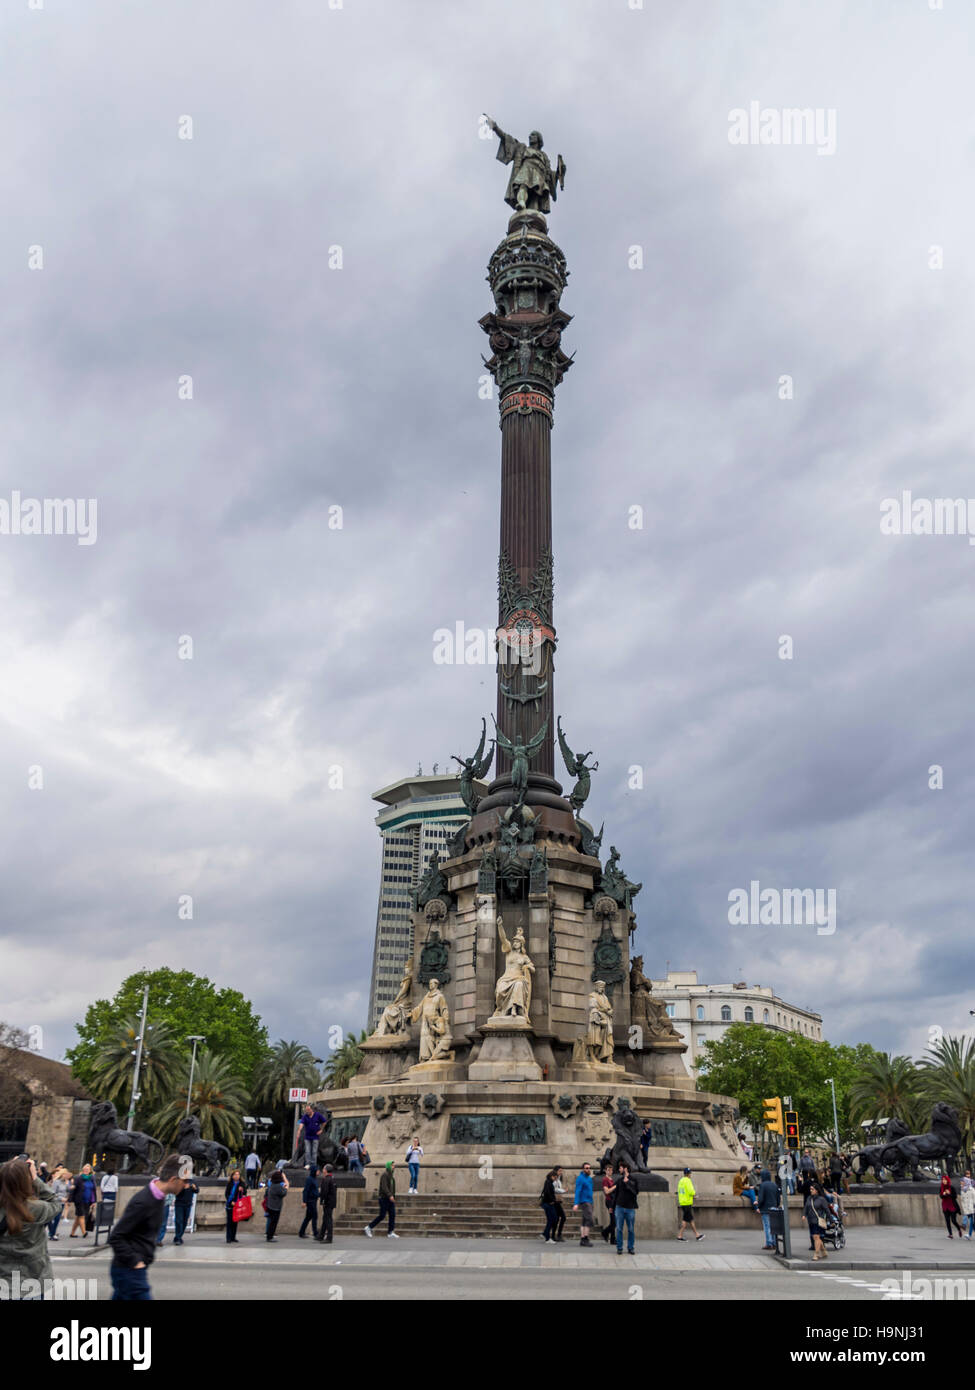 Statue of Christopher Columbus on top of a column in Barcelona, Catalonia, Spain, on a cloudy day. Stock Photo